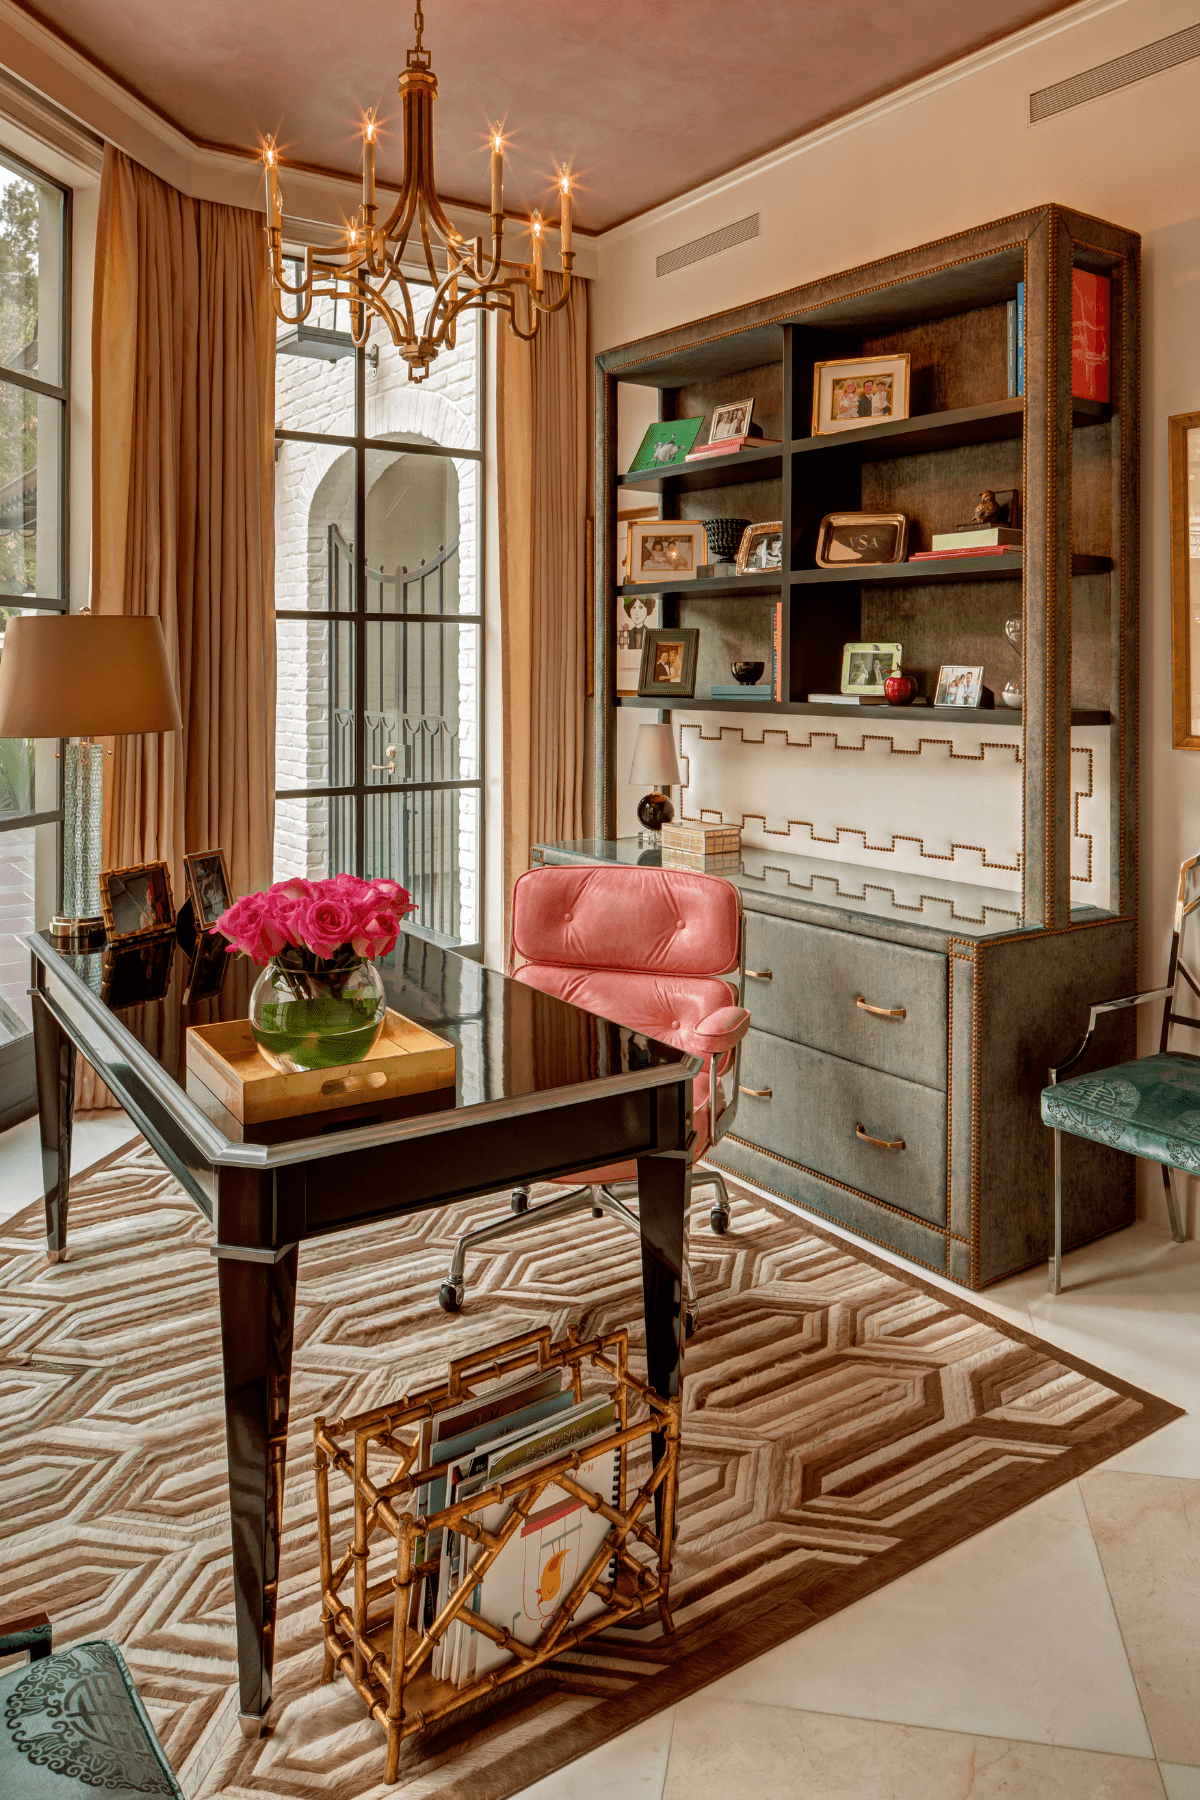 An office space at the Willowick Residence featuring vibrant furnishings and a classic chandelier.